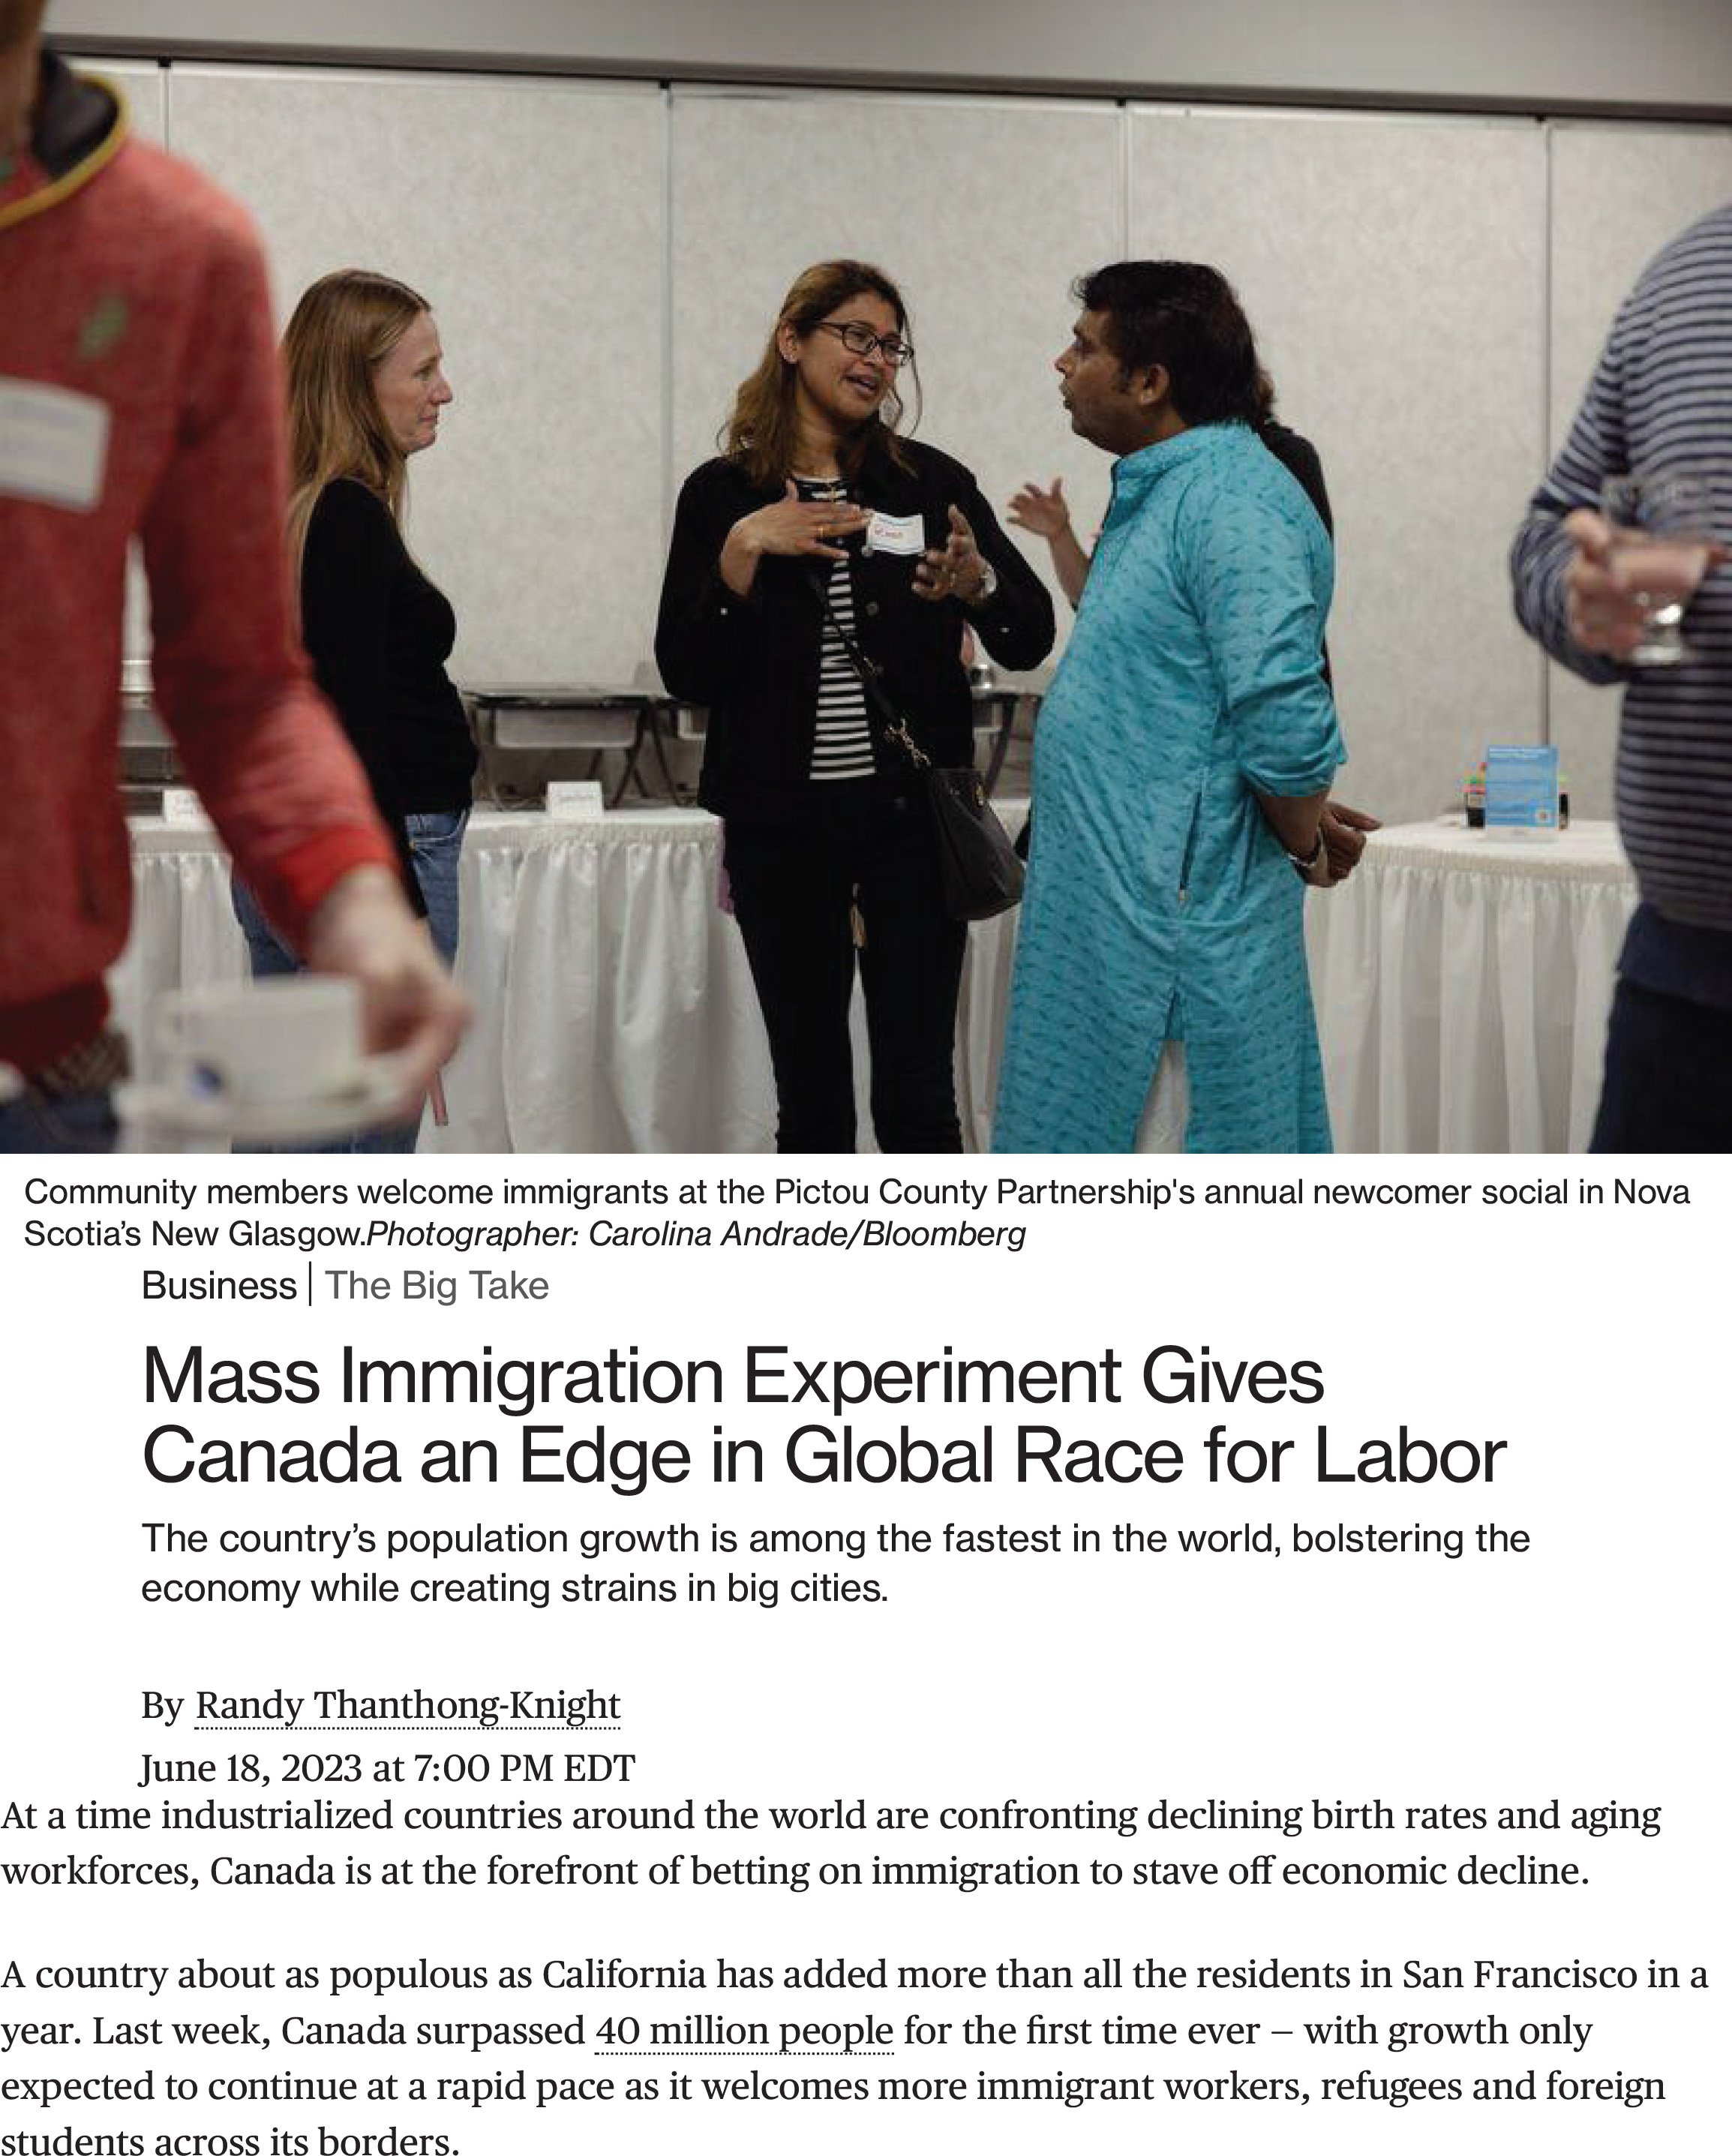 Canada’s Immigration_1-1.jpg